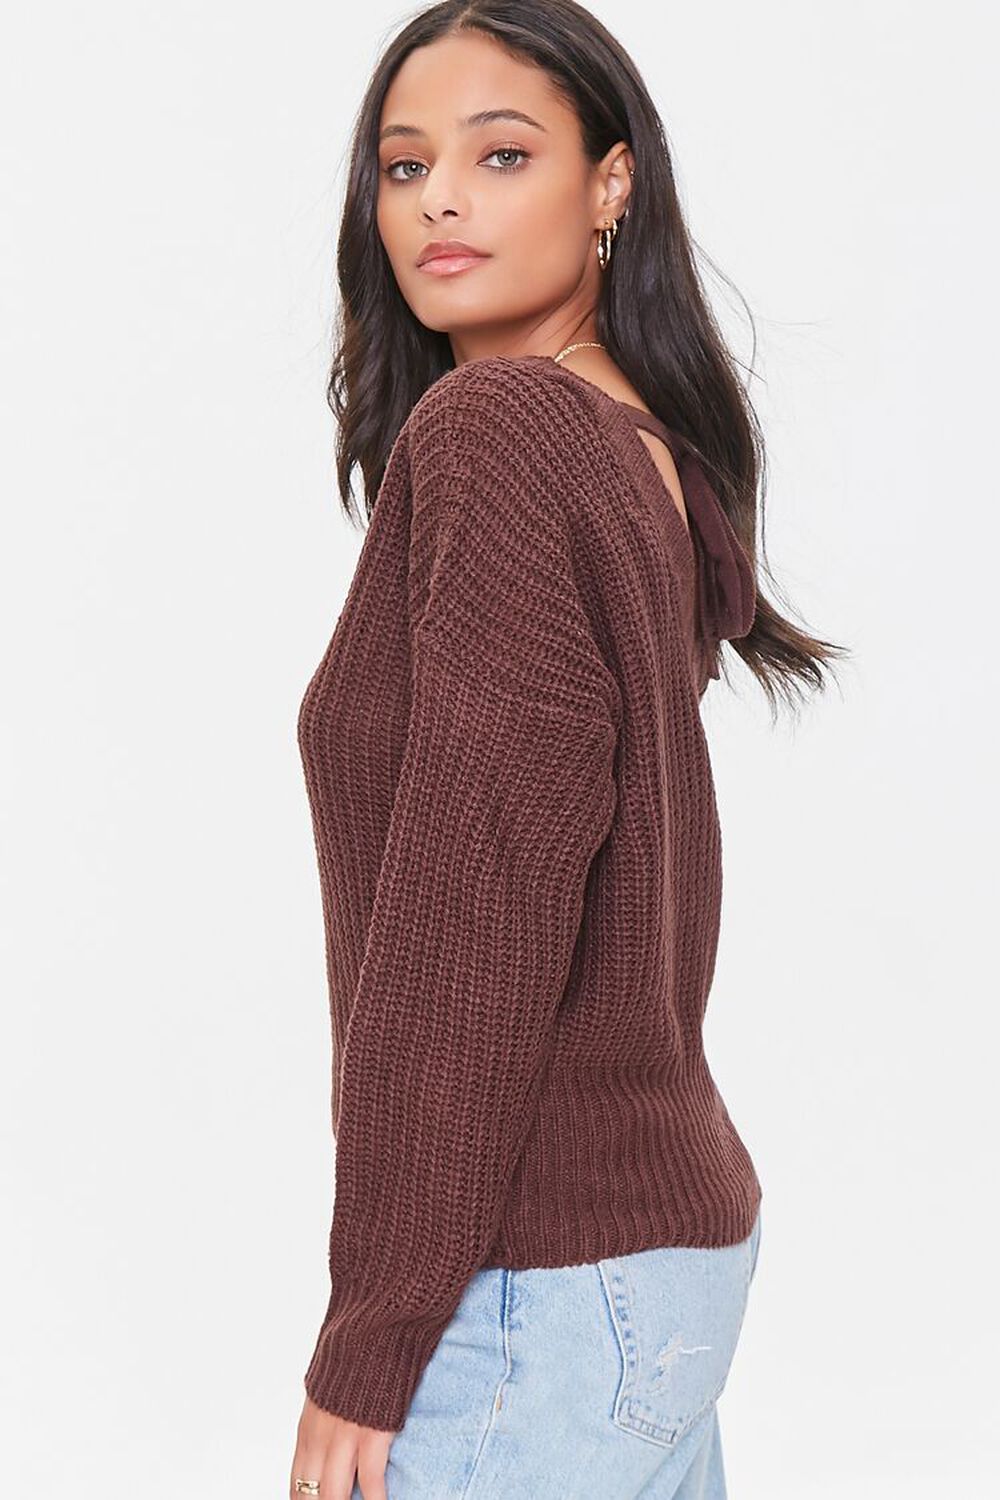 Purl Knit Self-Tie Sweater, image 2